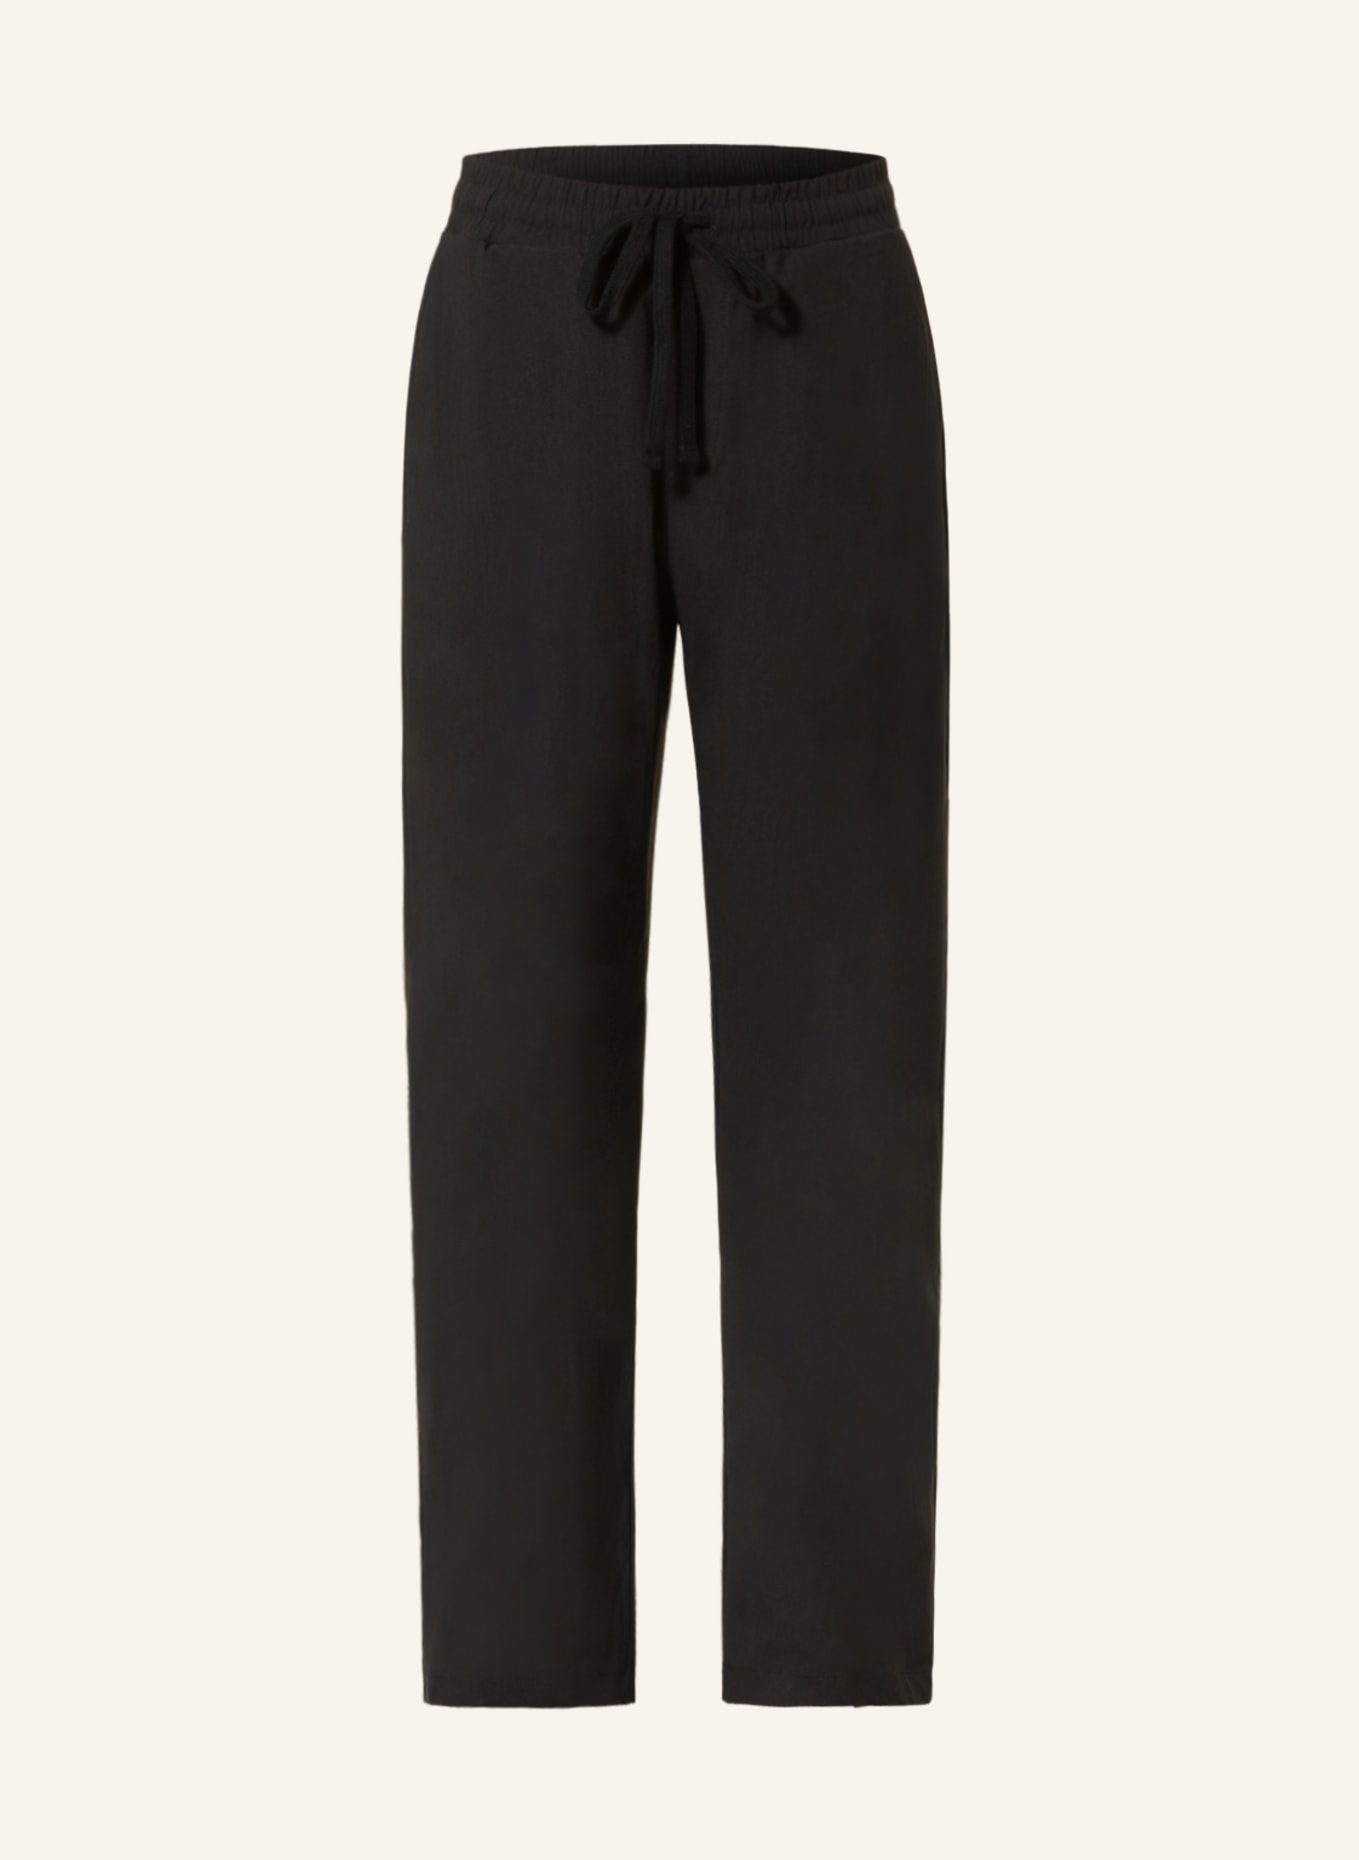 thom/krom Pants in jogger style, Color: BLACK (Image 1)